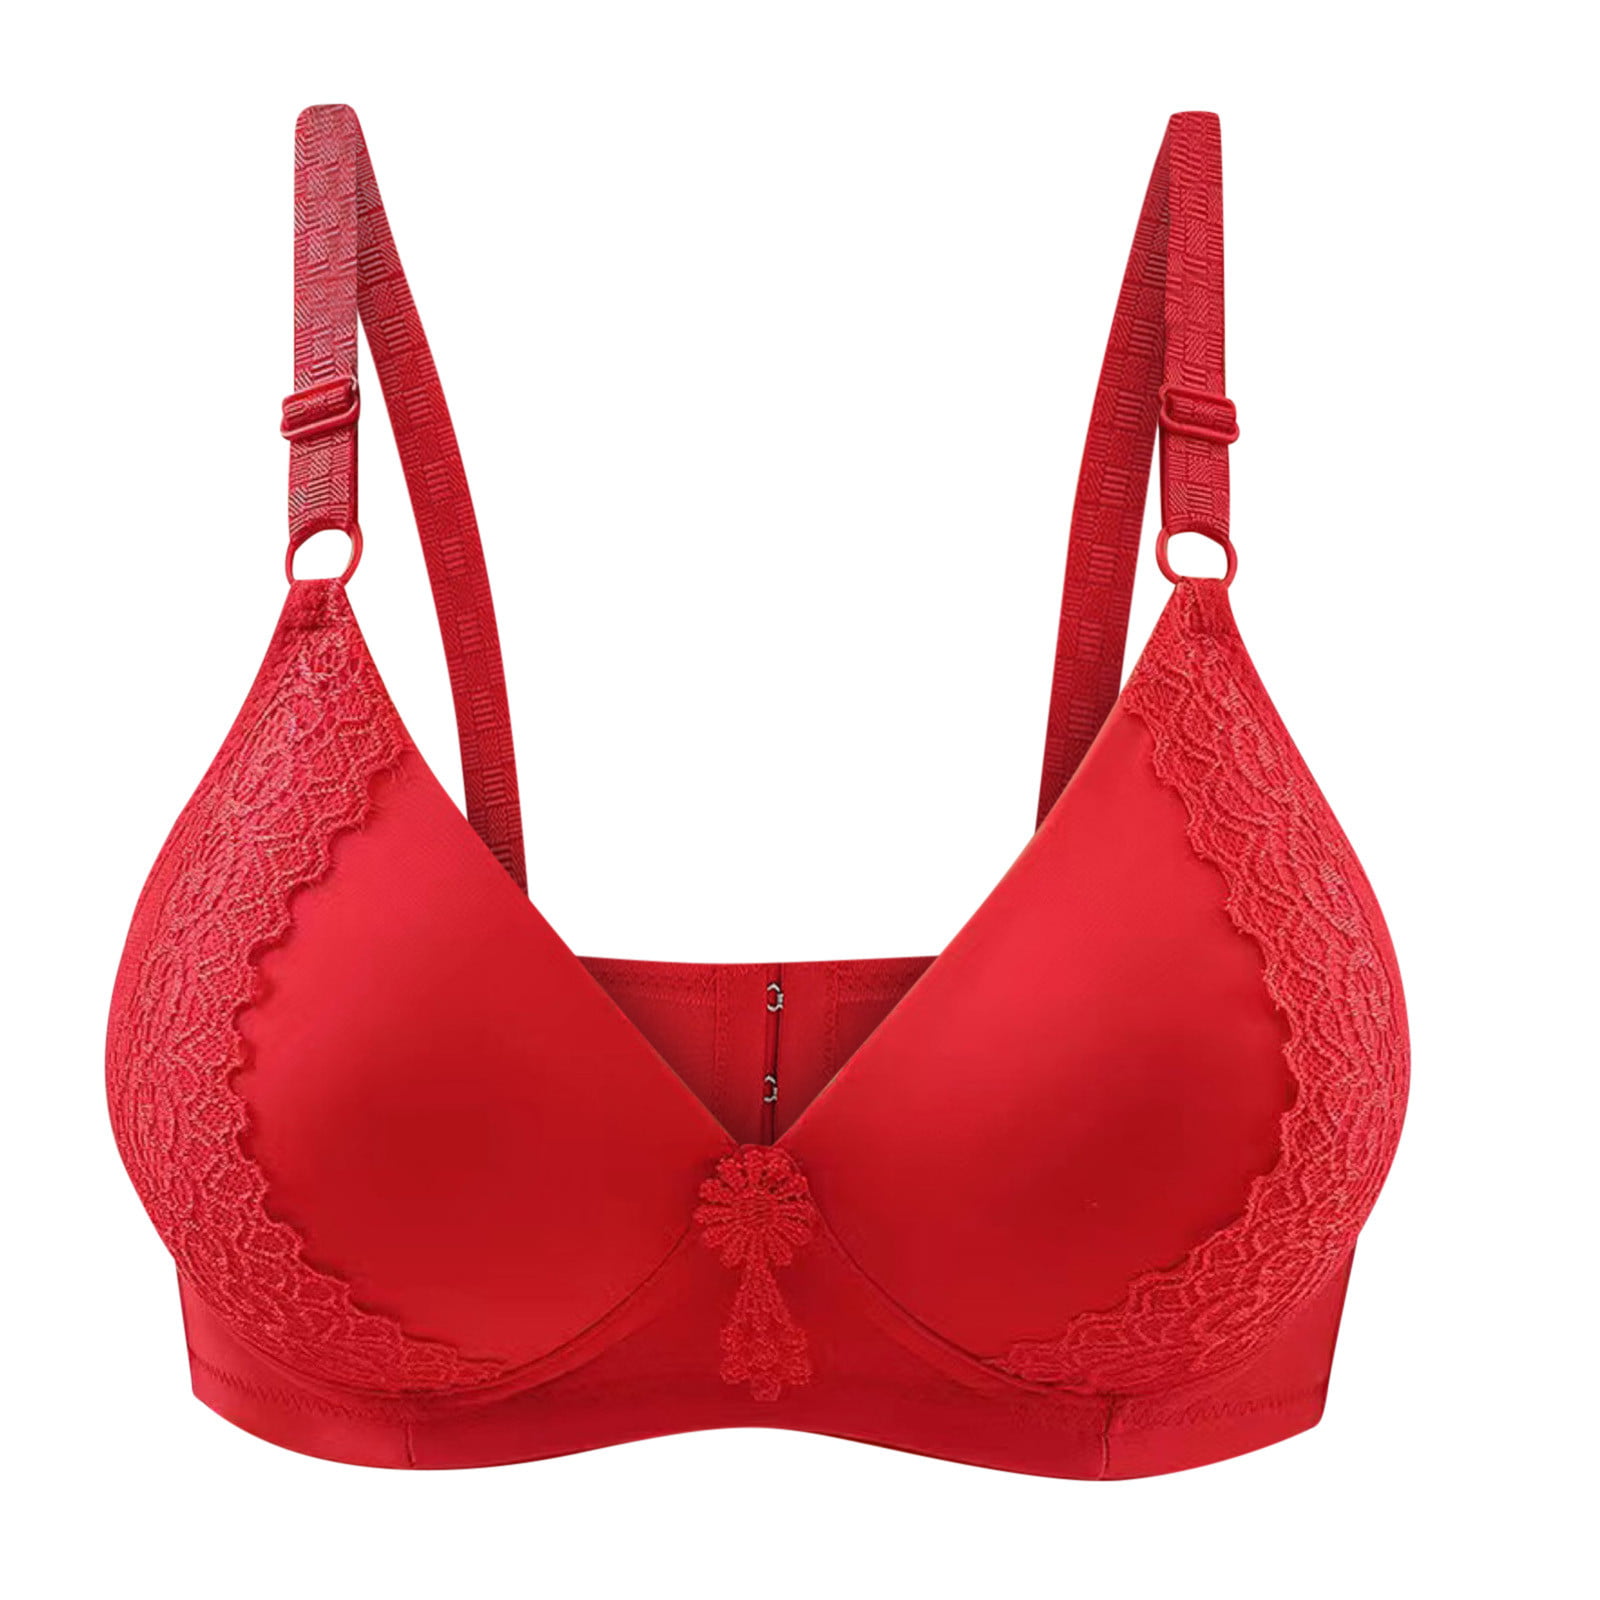 Ladyland Full Coverage Mould Cup Back 4 Hook Bra - 38c, No, Western Wear,  1, Red at Rs 335/piece, Ladies Bra